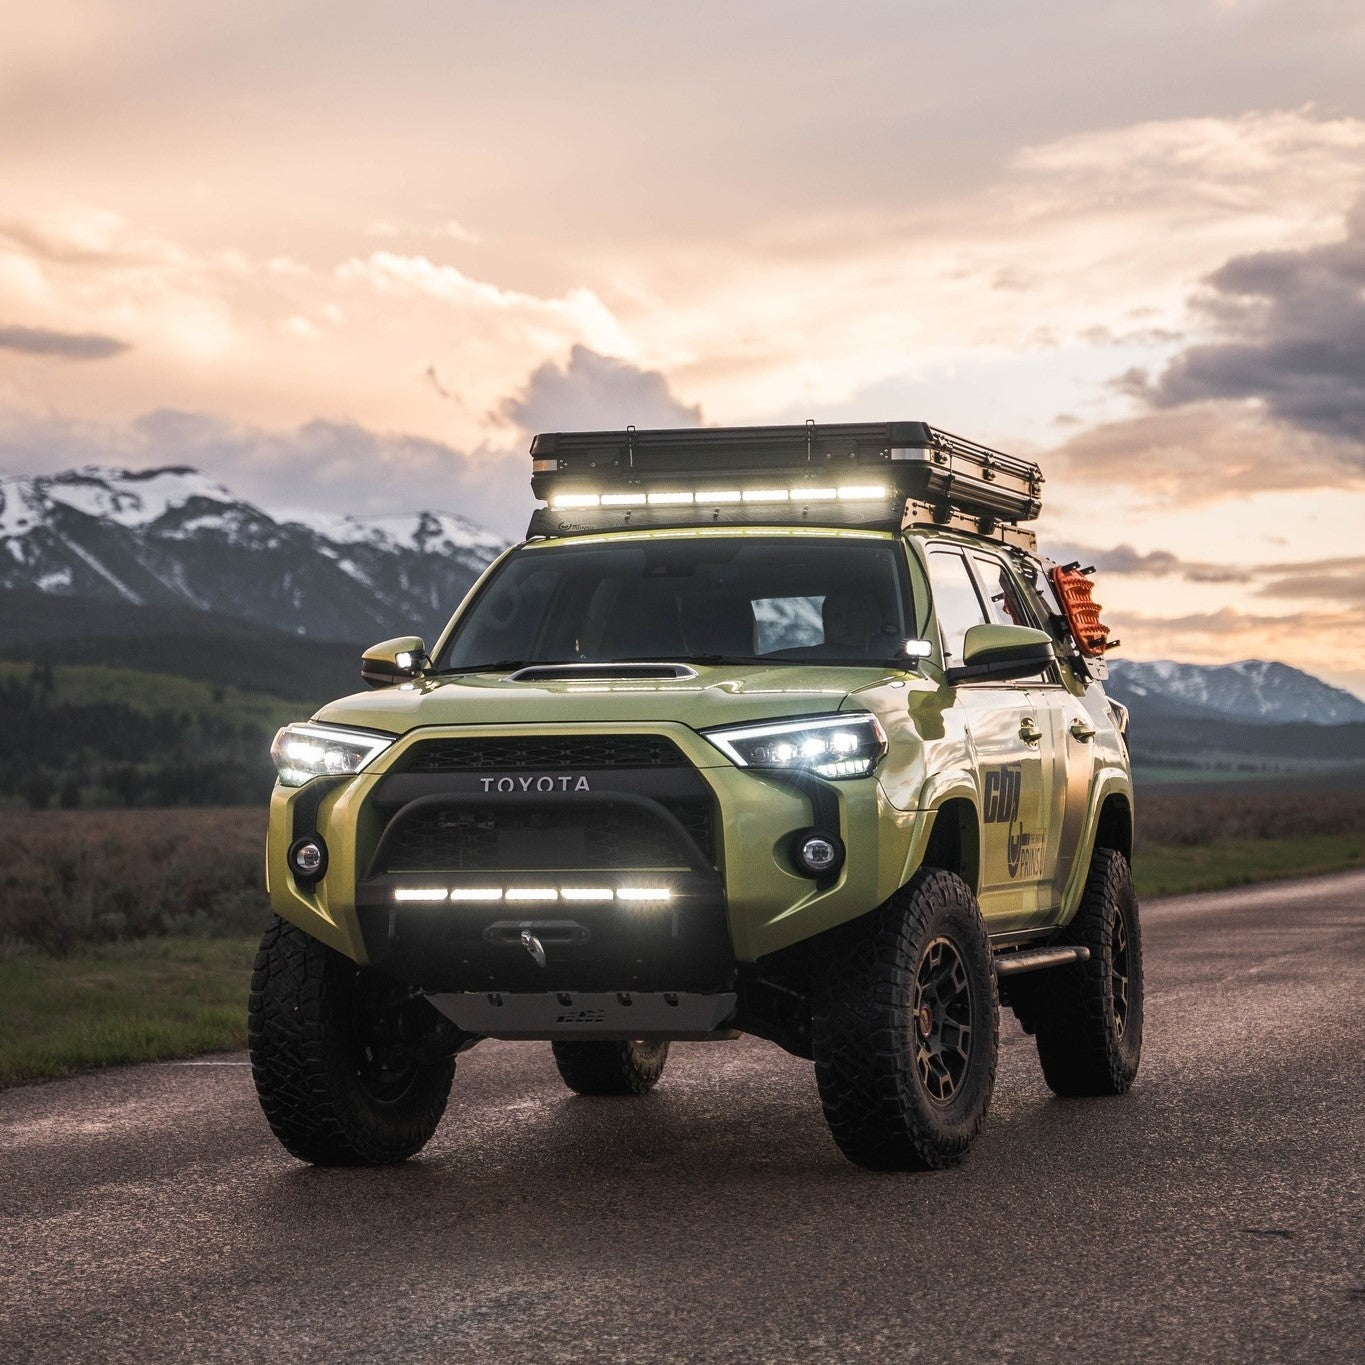 Prinsu Rack 4Runner Edition: 5 Reasons Why This Rack System is a Must Have